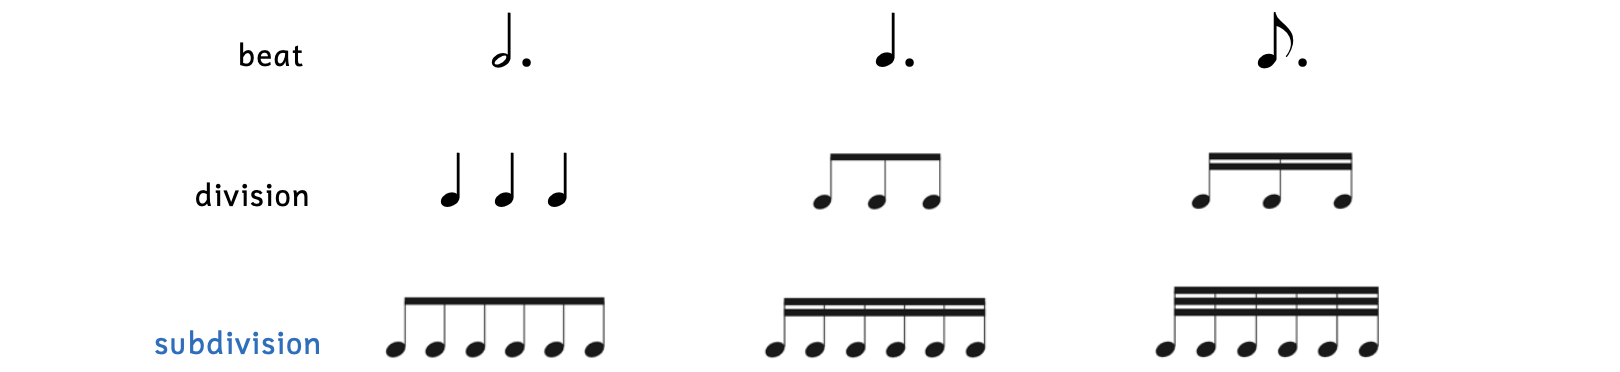 Examples of dotted notes divided into divisions and subdivisions. The dotted half note beat divides into three quarter notes and subdivides into six eighth notes. The dotted quarter note beat divides into three eighth notes and subdivides into six sixteenth notes. The dotted eighth note beat divides into three sixteenth notes and subdivides into three thirty-second notes.